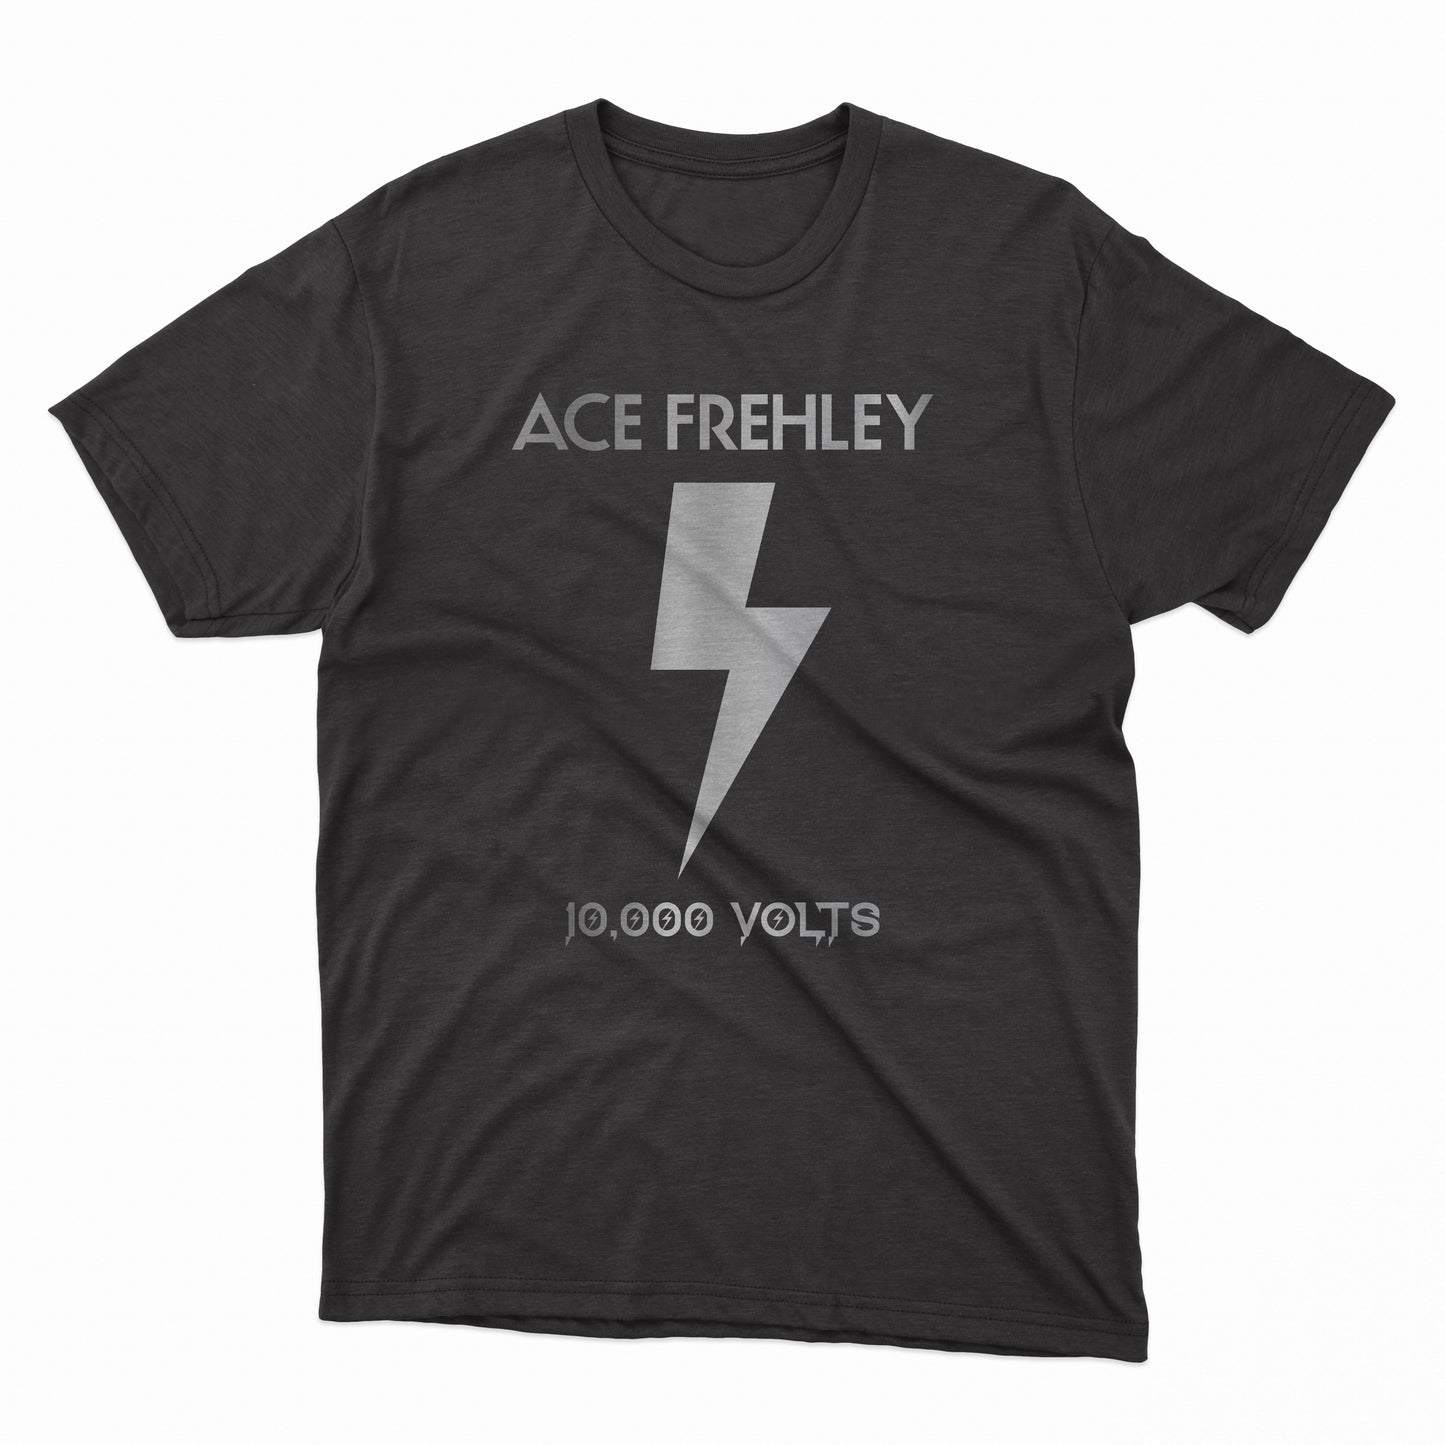 Ace Frehley "10,000 Volts" Signature T-shirt